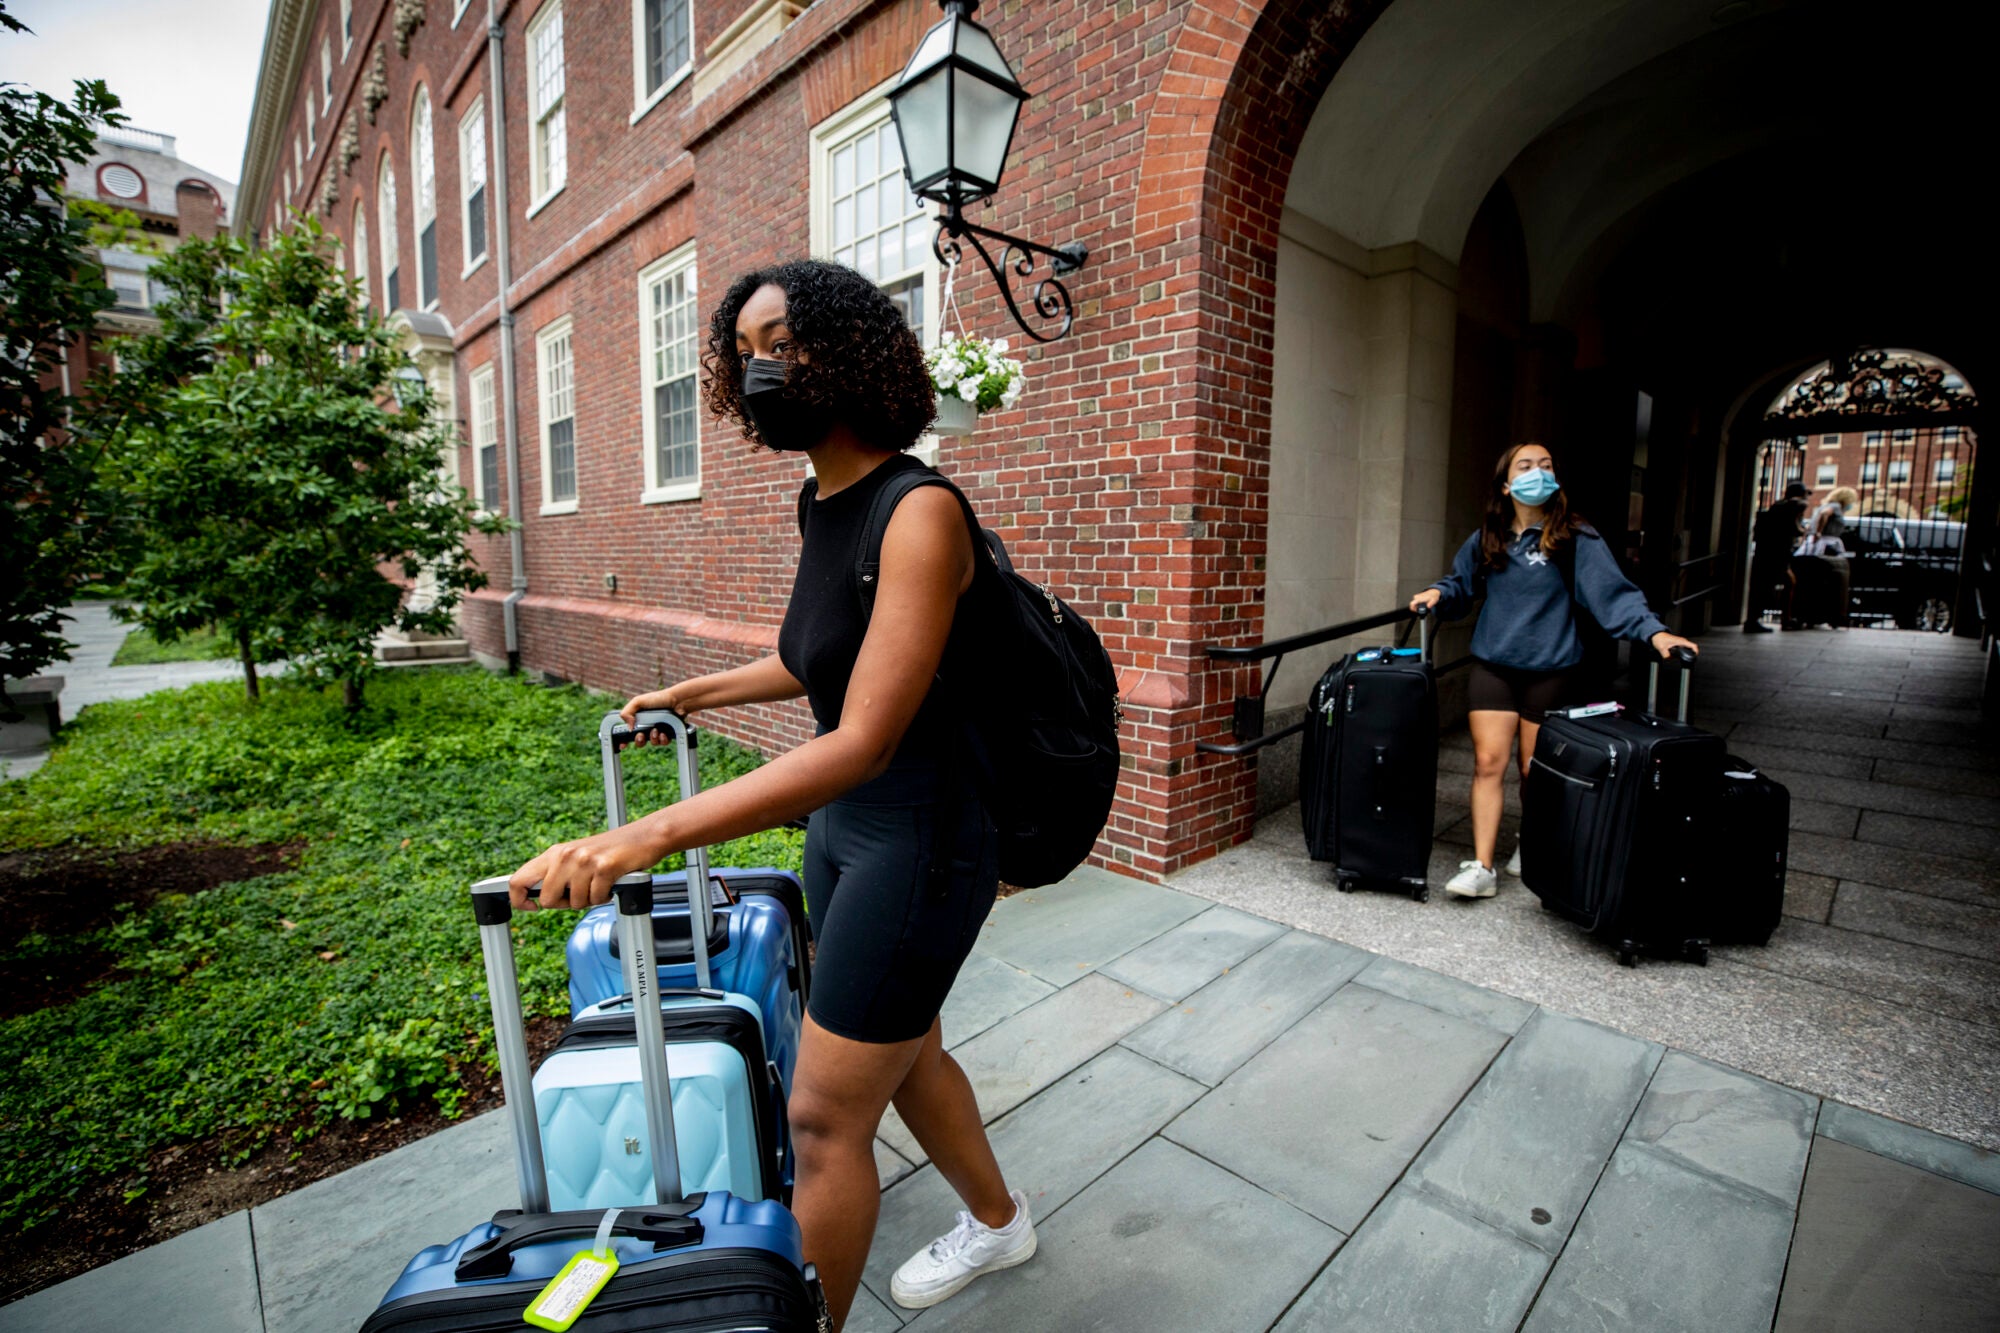 Students wheel luggage through the entry way of one of Harvard's dorms.